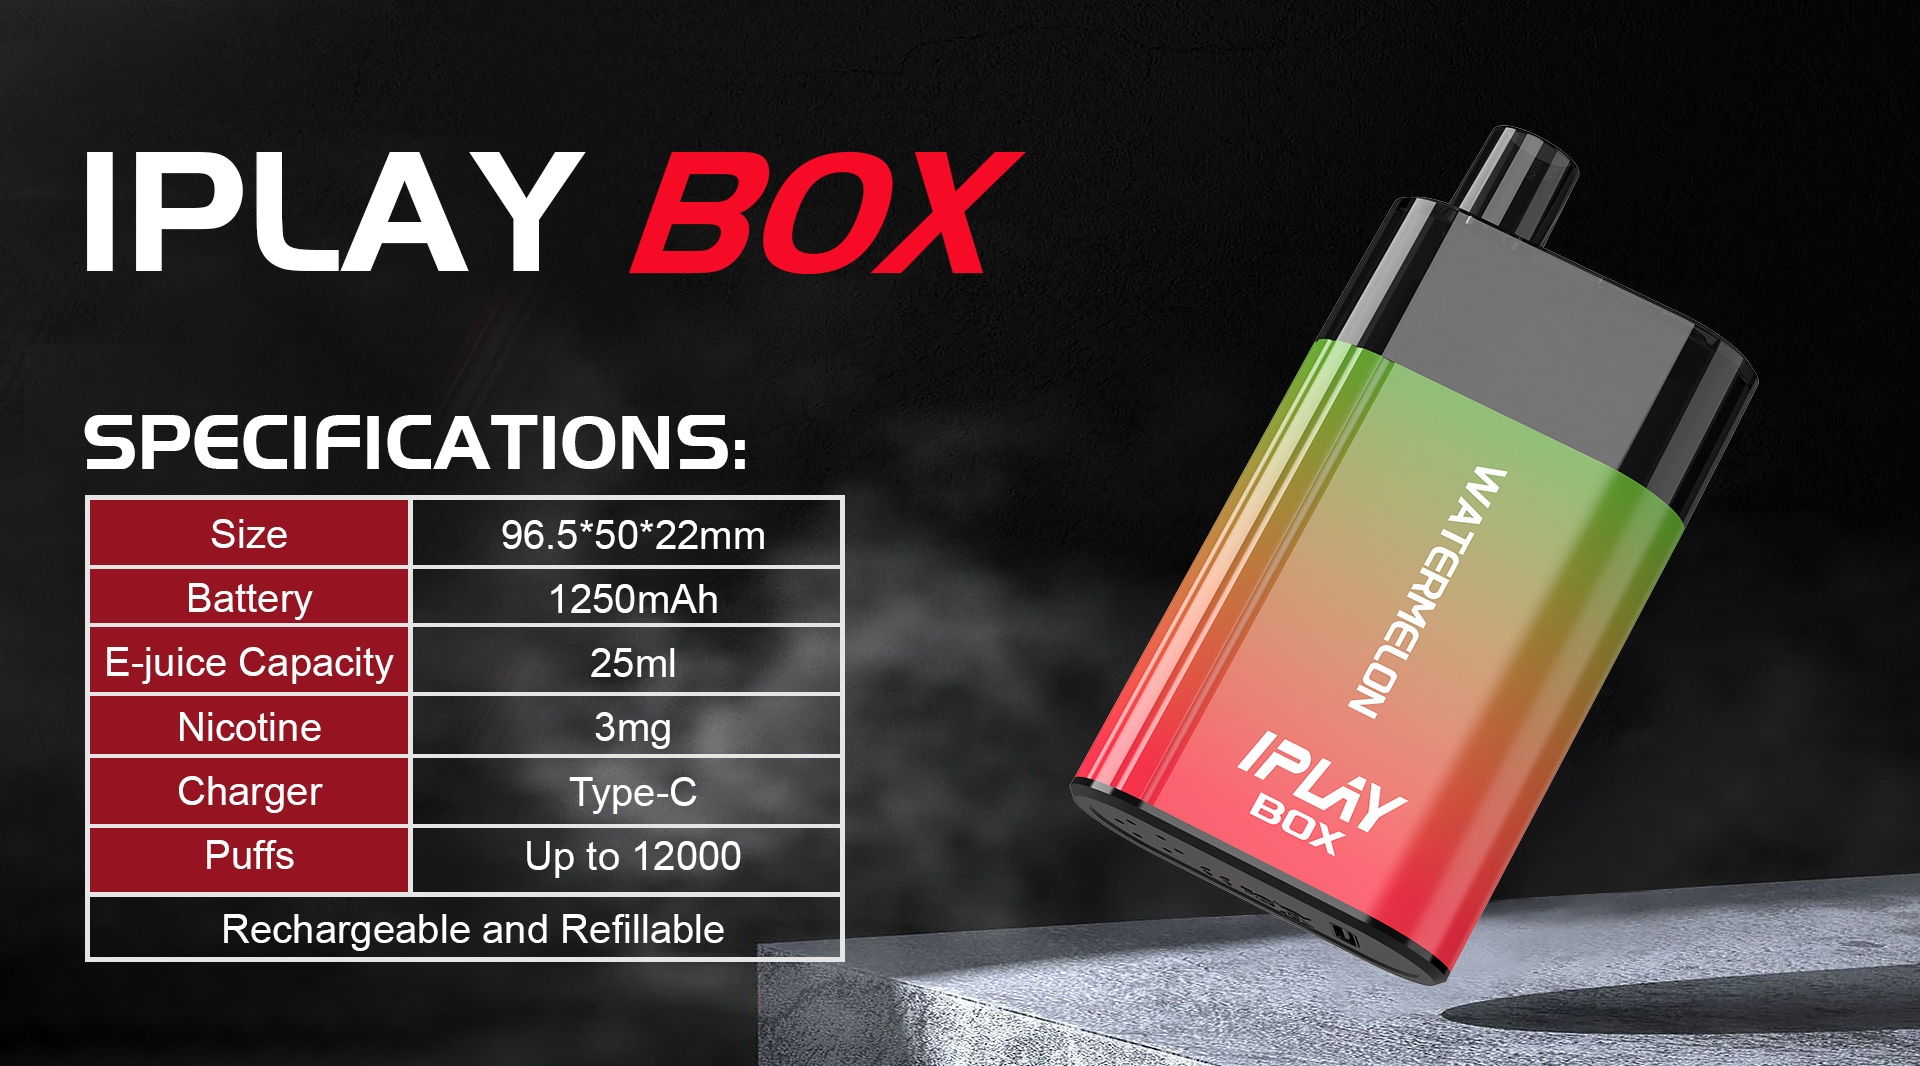 Iplay Box Disposable Vape - Specifcations